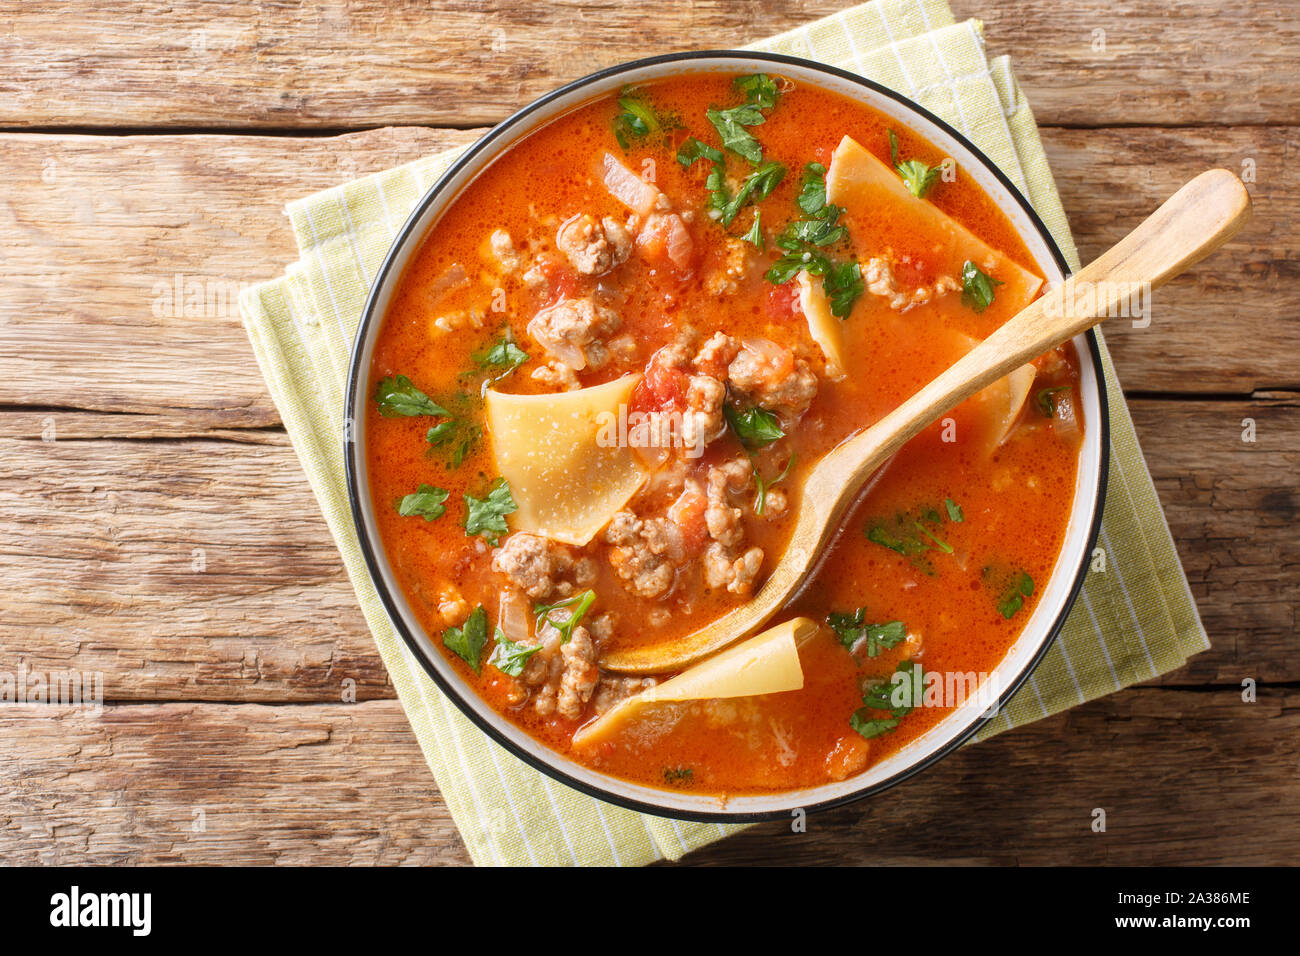 Portion of rich lasagna soup close-up in a plate on the table. Horizontal top view from above Stock Photo